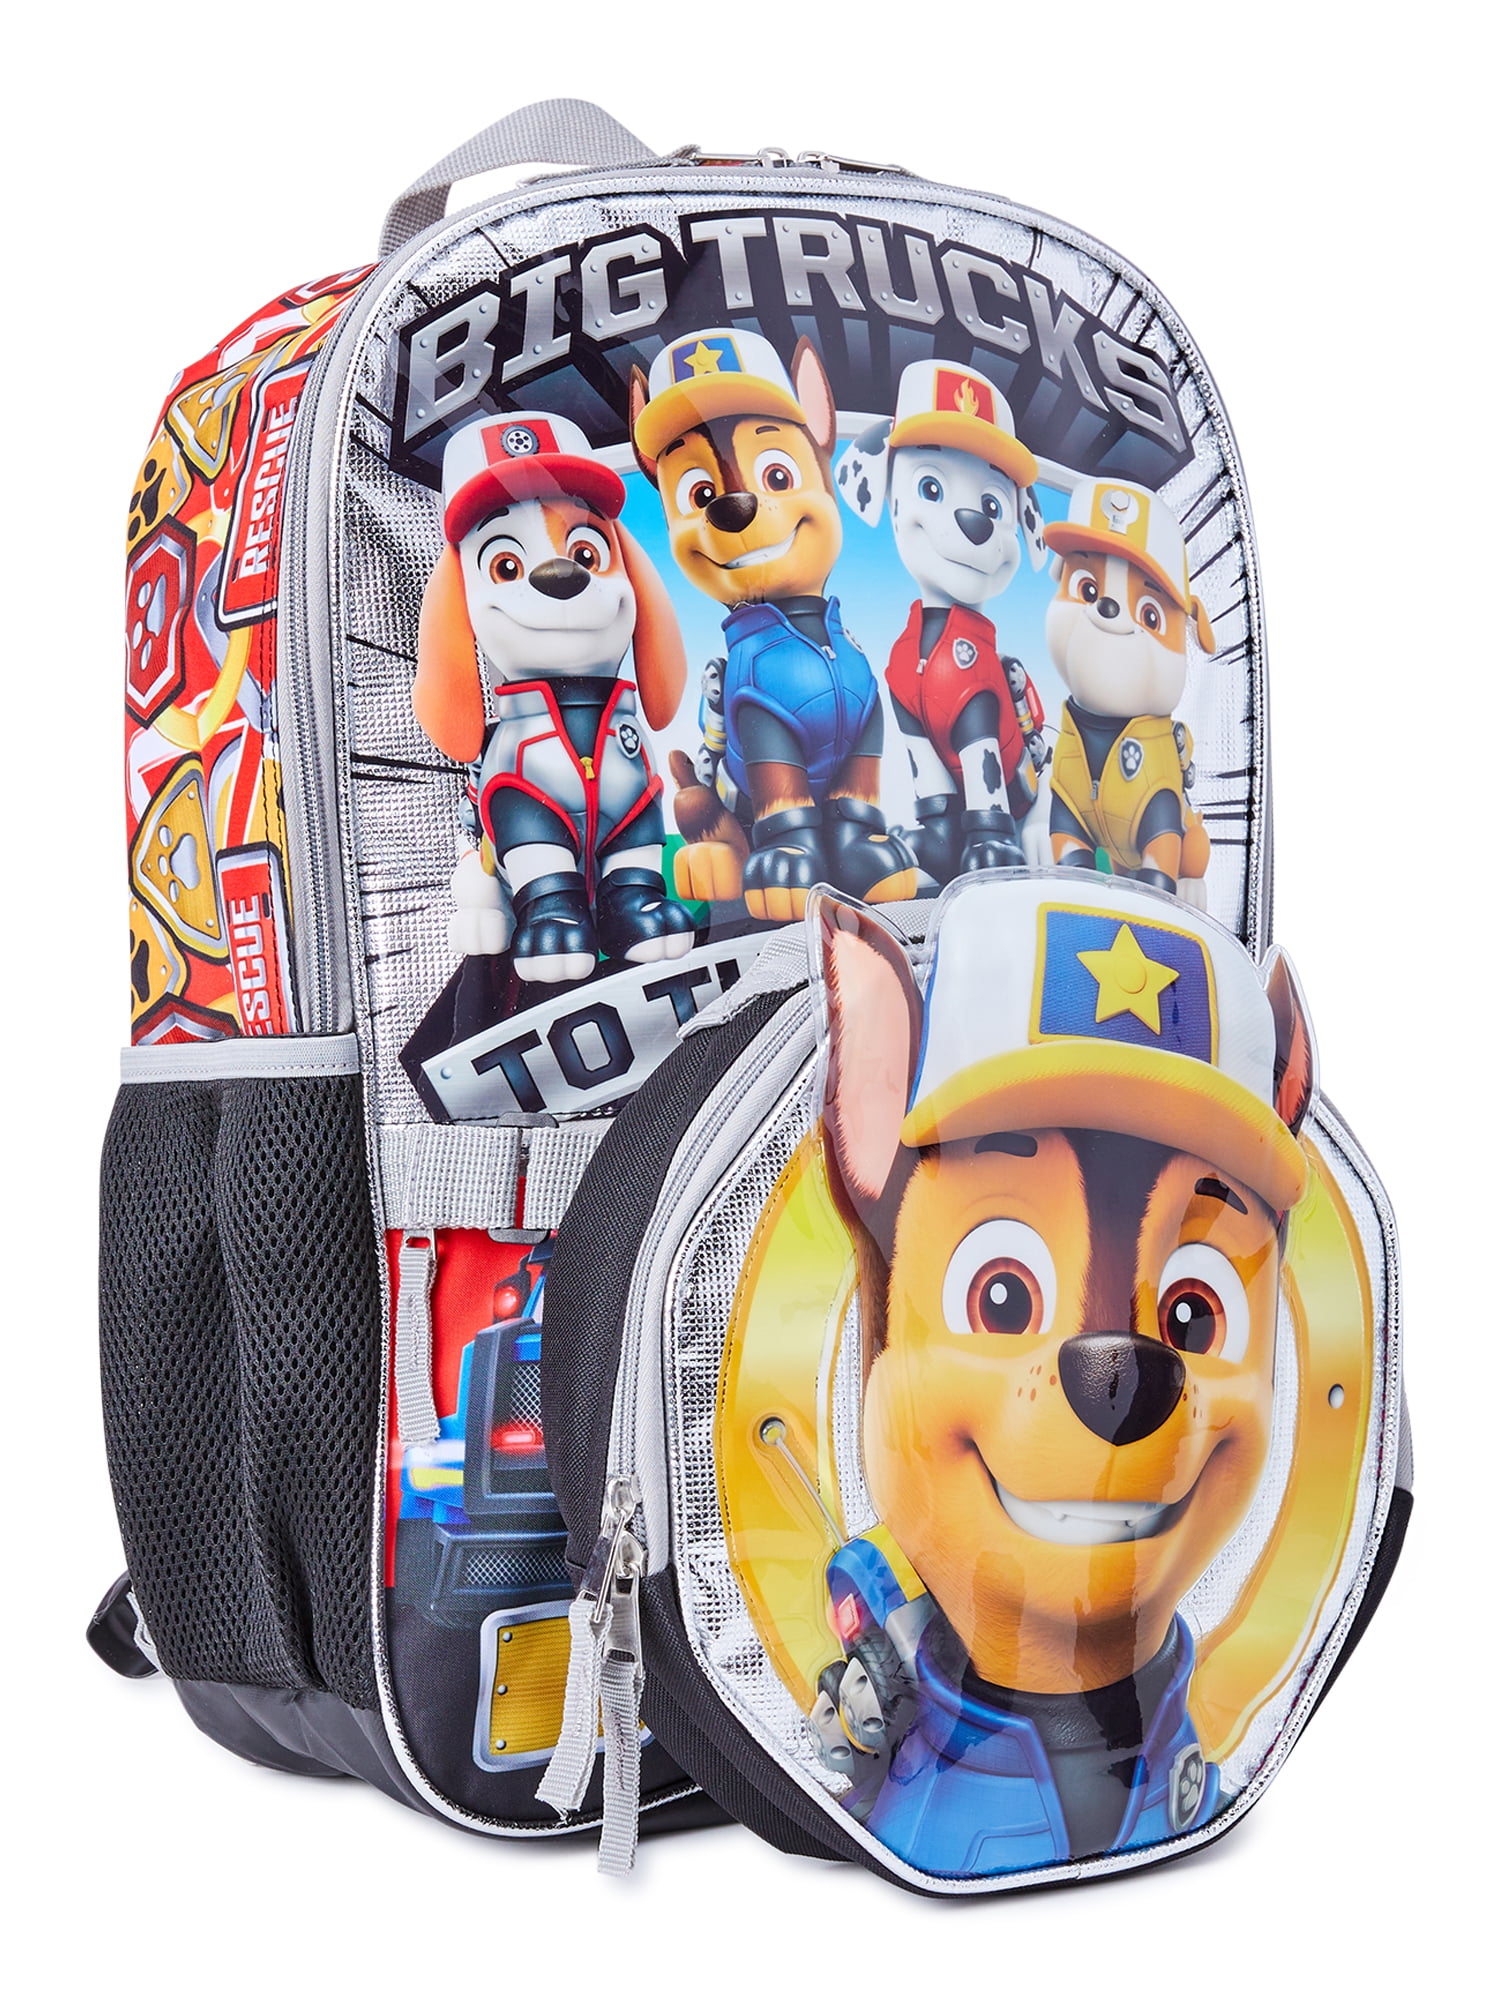 Paw Patrol Rescue Boys 17" Laptop Backpack 2-Piece Set with Lunch Bag, Multi-Color